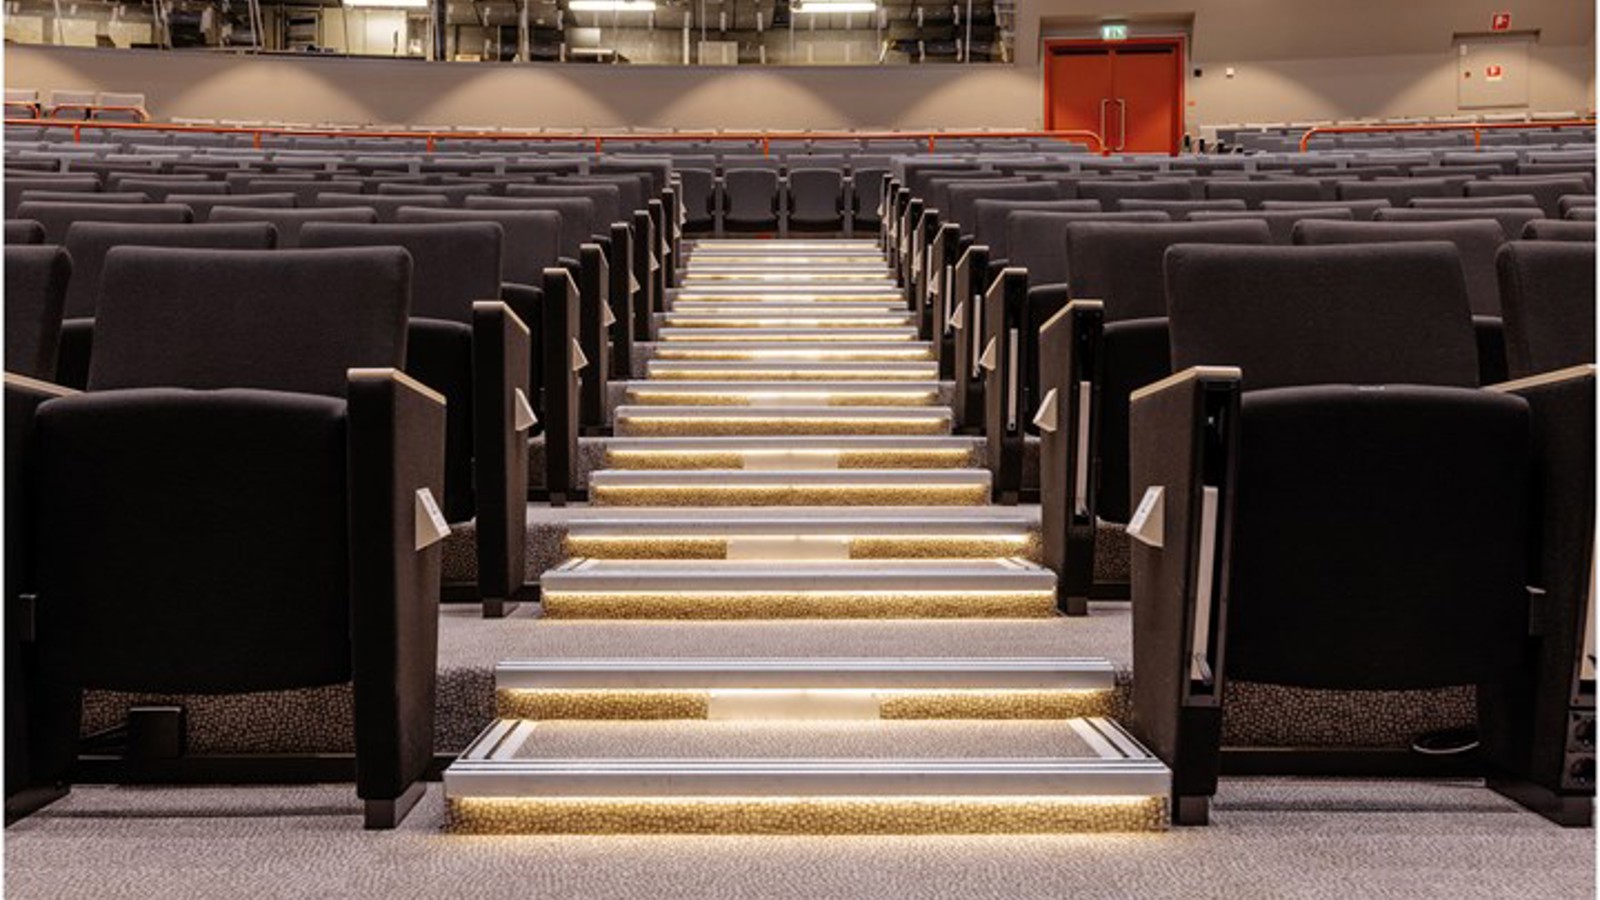 Close-up of stairs and cinema seats